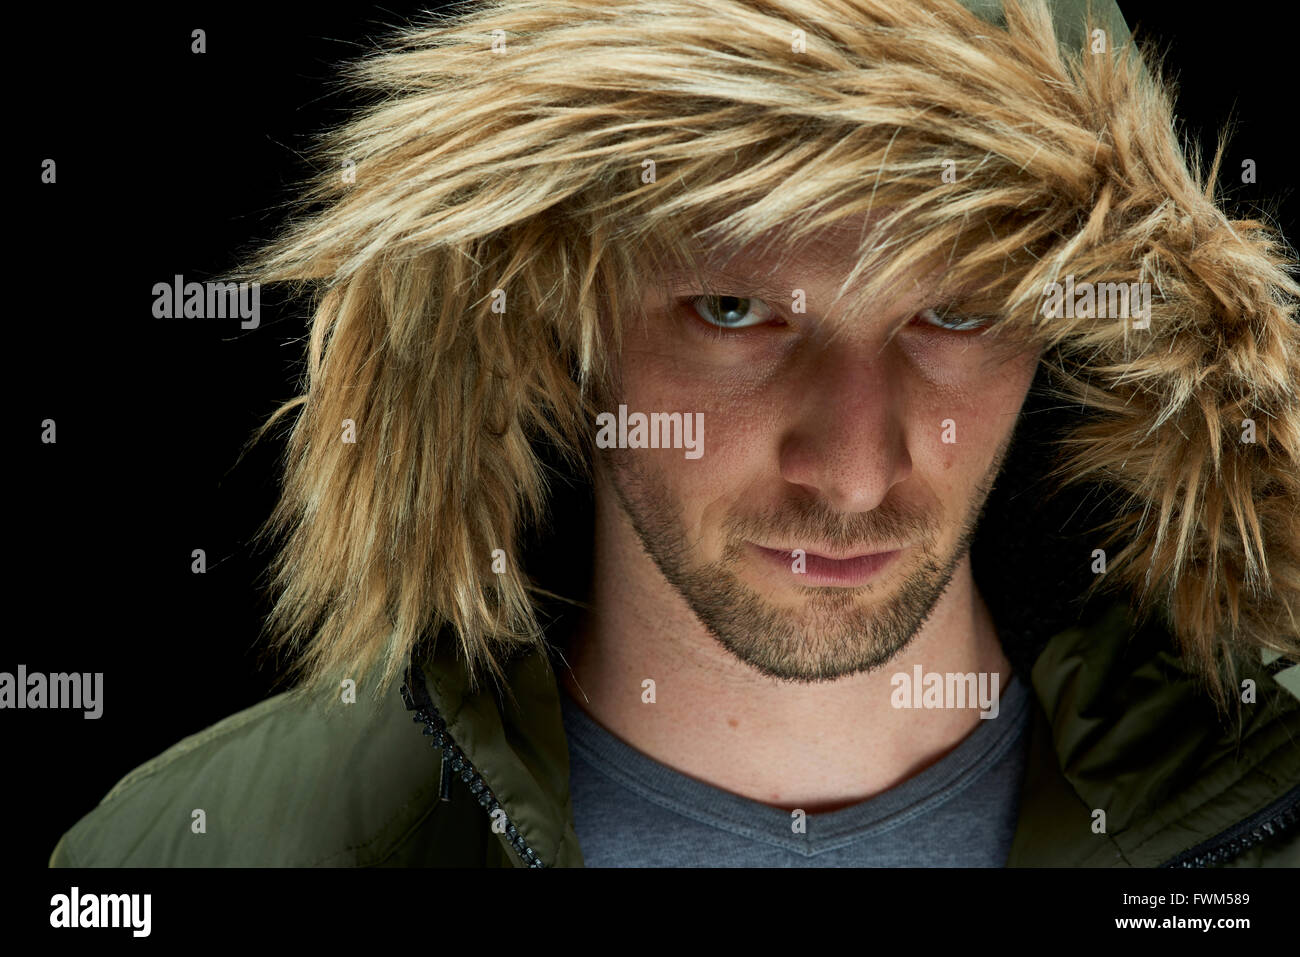 Low key studio portrait of suspicious young adult caucasian model wearing winter coat with hood on. Stock Photo